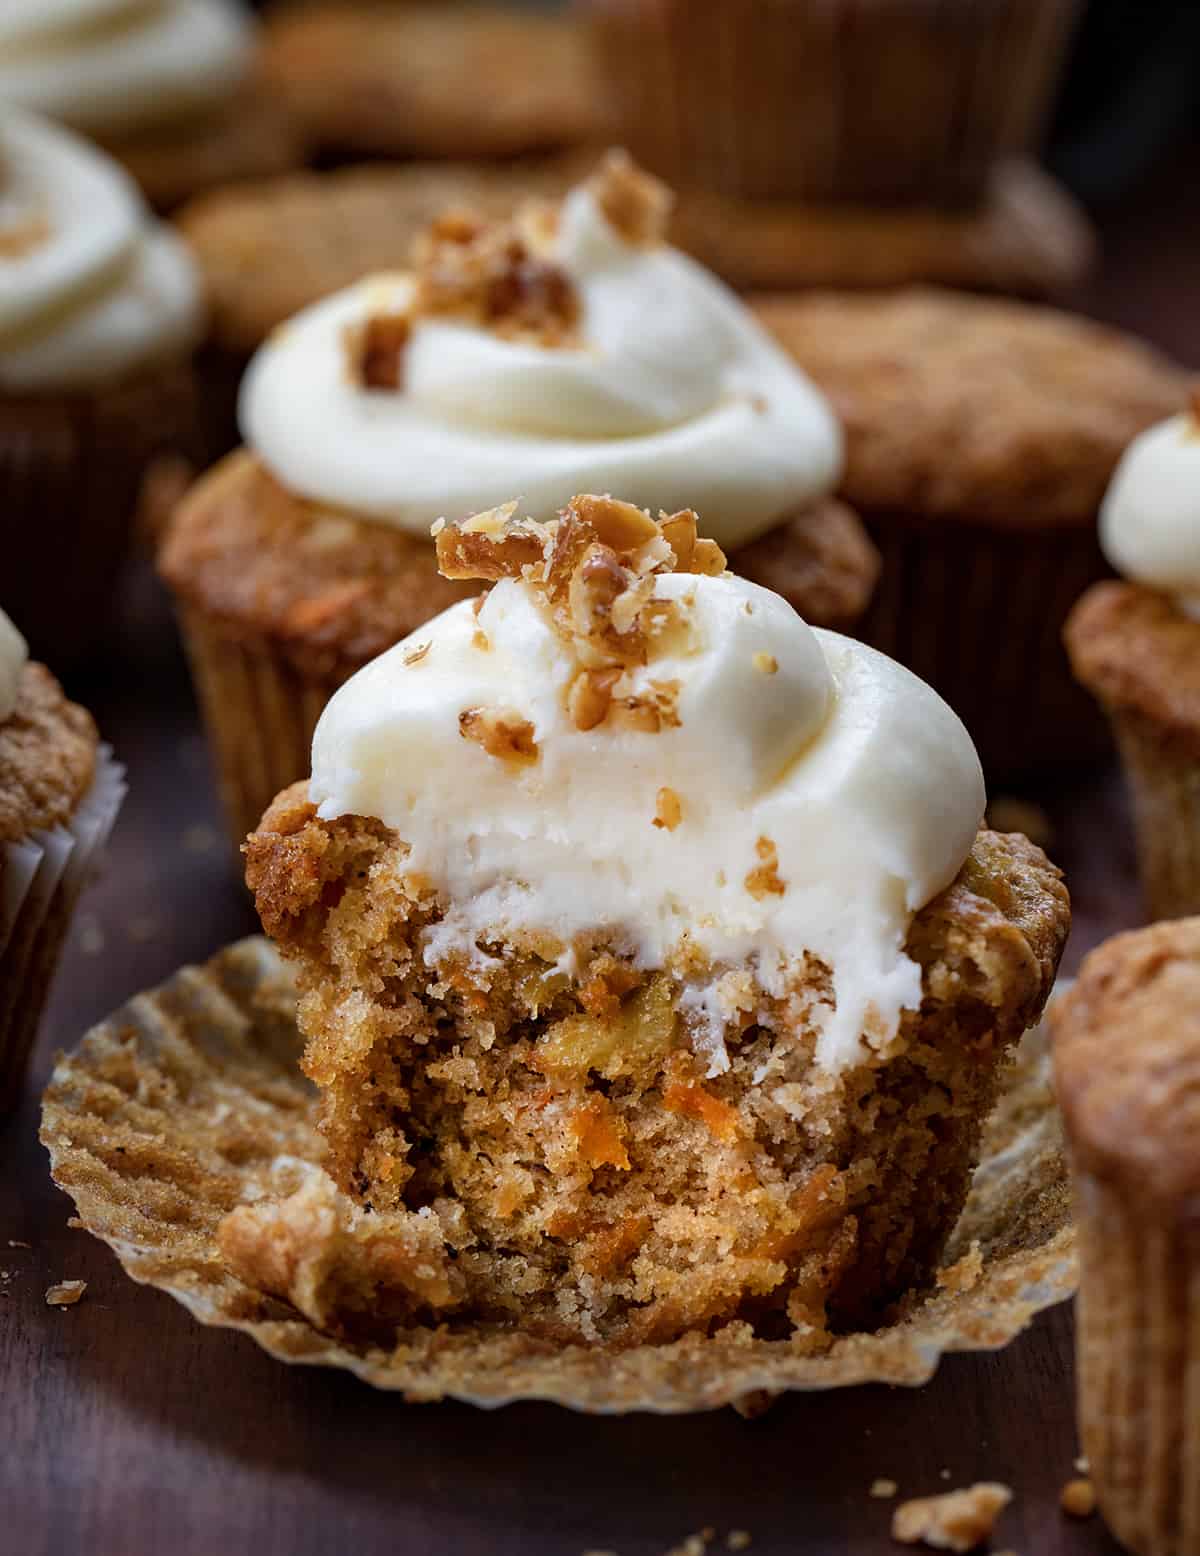 Carrot Cake Cupcake Next to Each Other and One with Some removed Showing the Inside Texture.